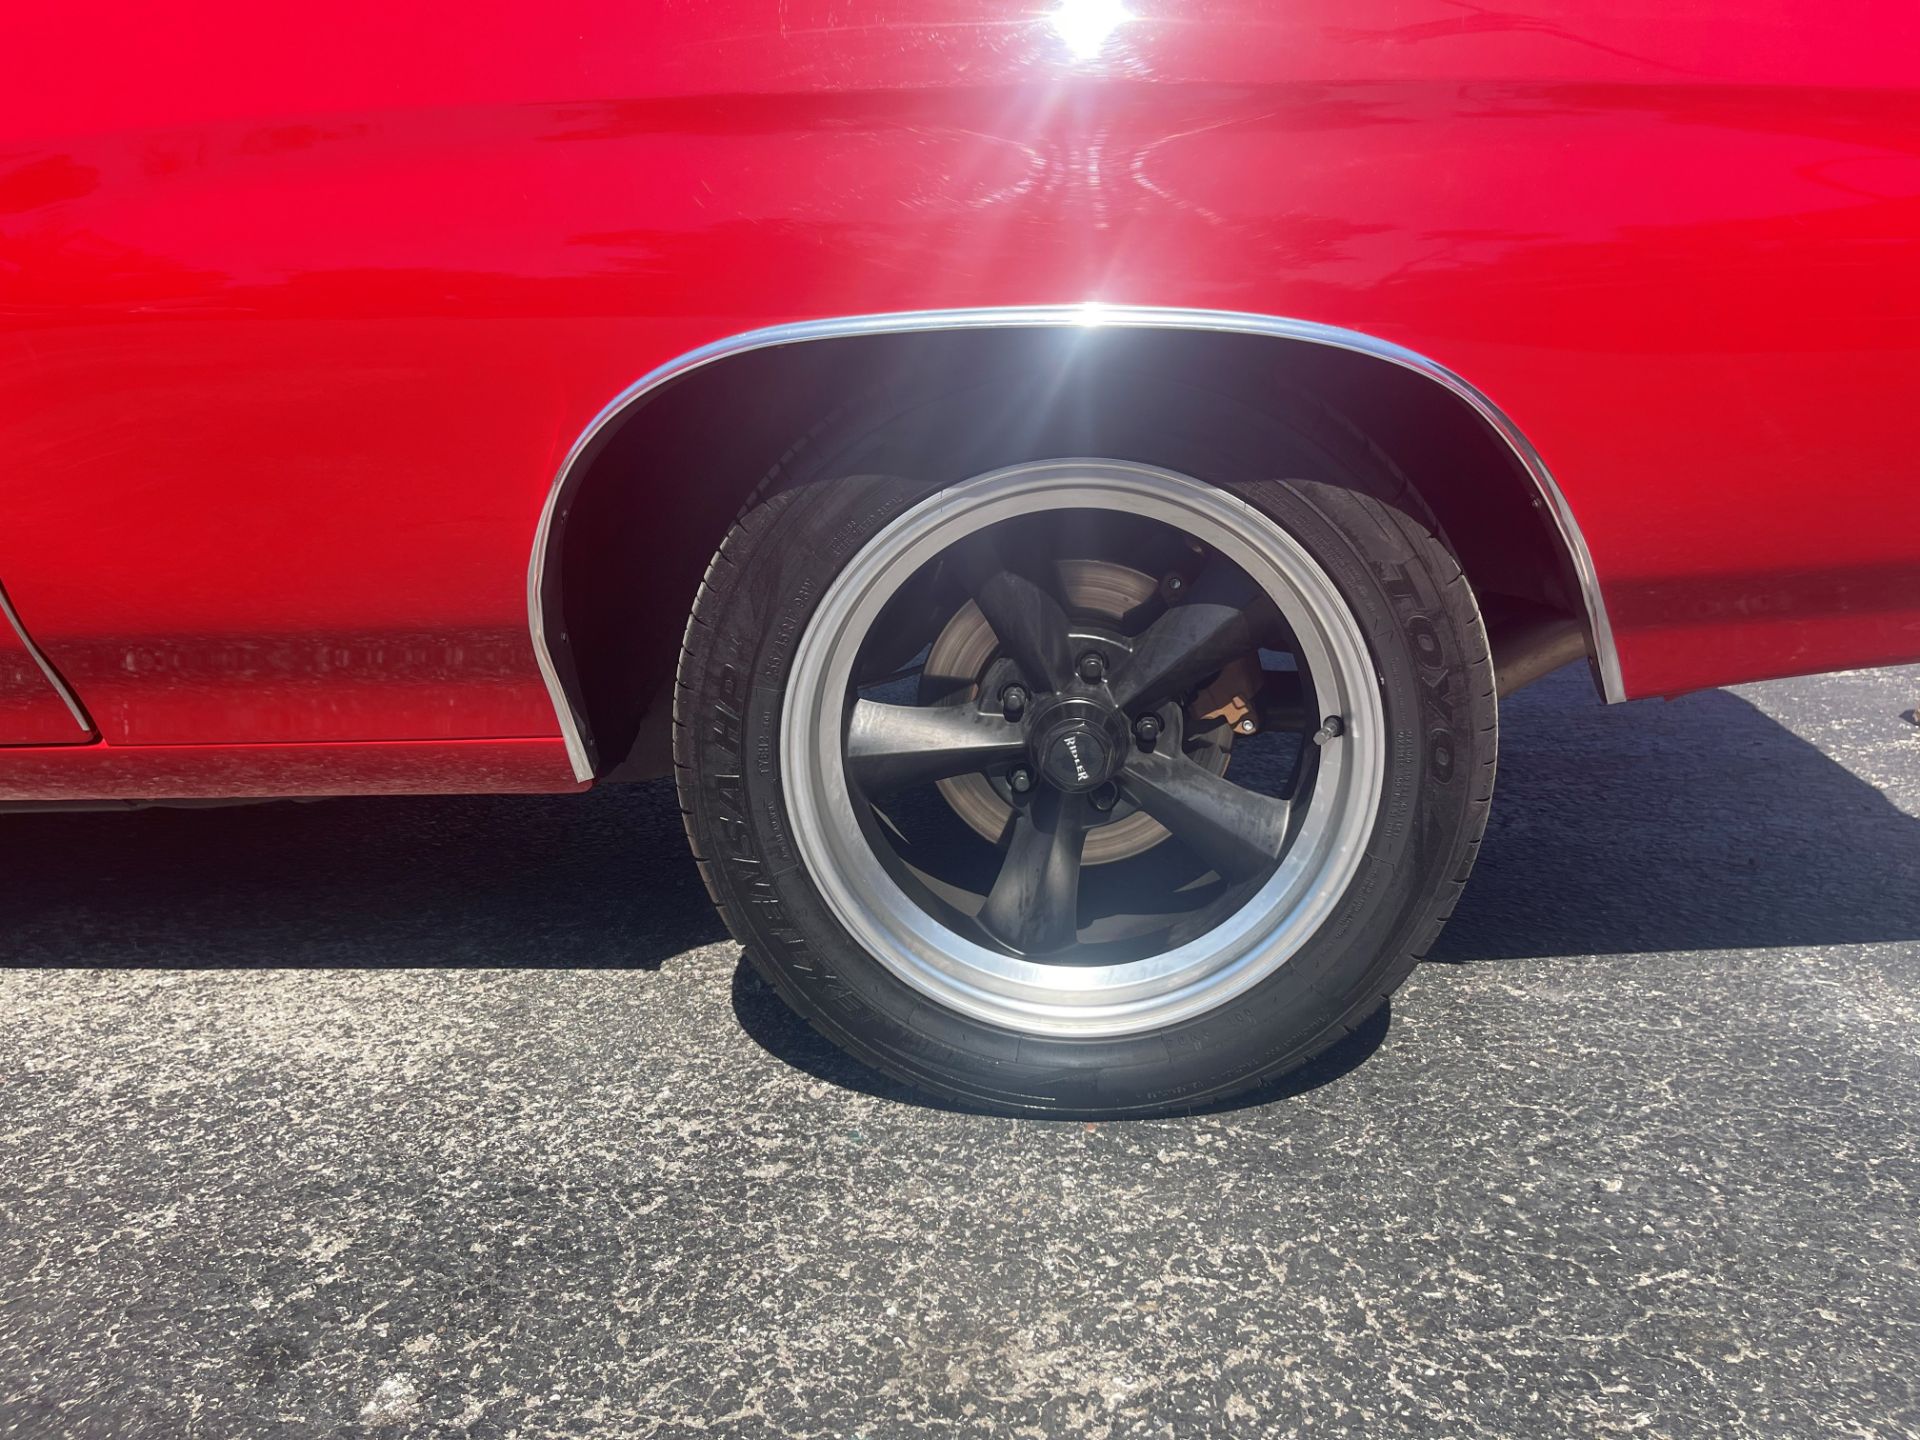 1972 Chevrolet Chevelle SS (undocumented) - Image 20 of 29